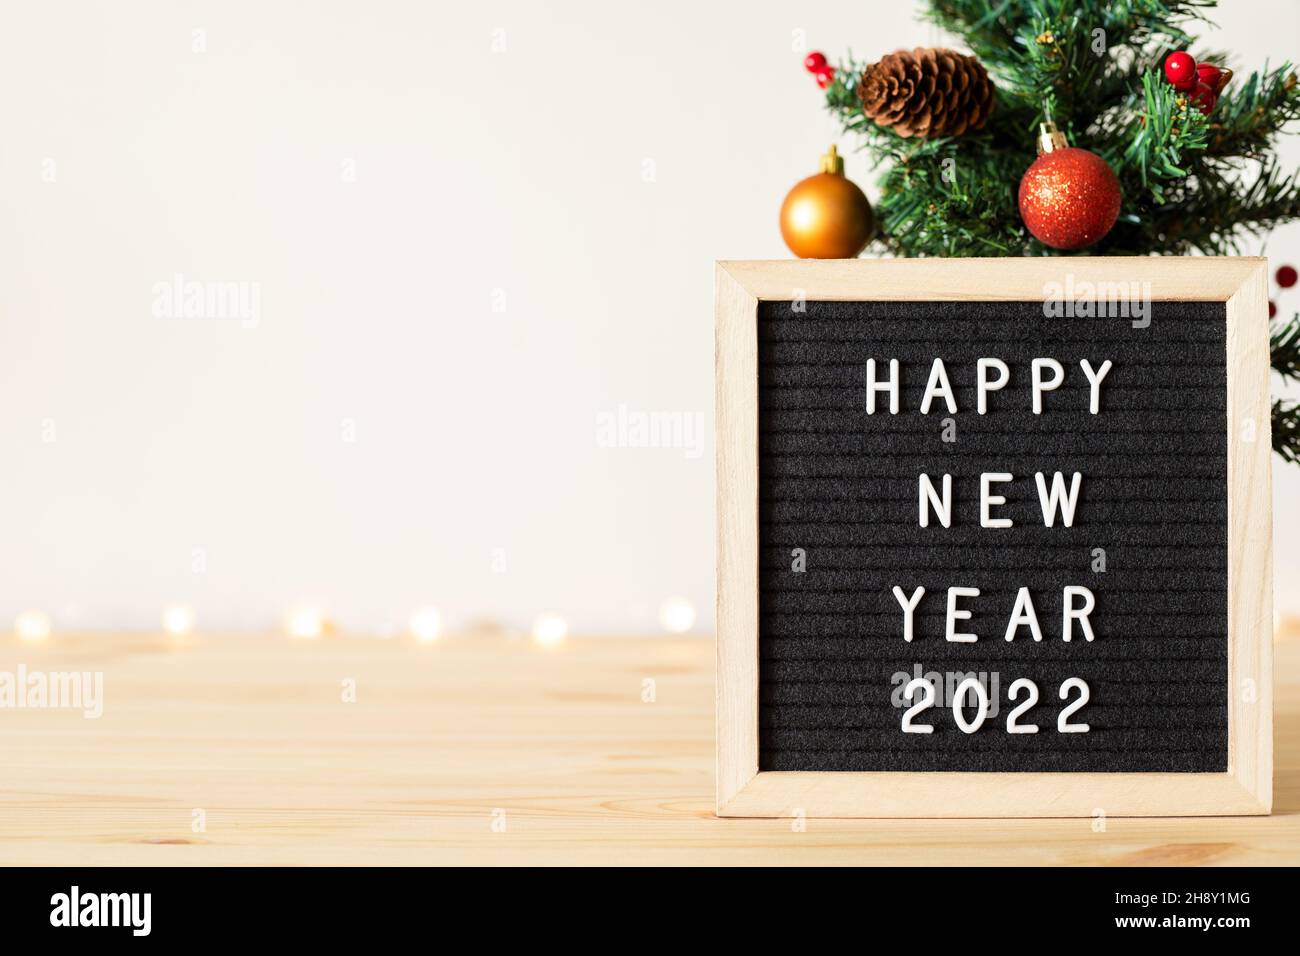 Happy new year 2022 greetings on letter board and Christmas tree with holiday decorations on table Stock Photo